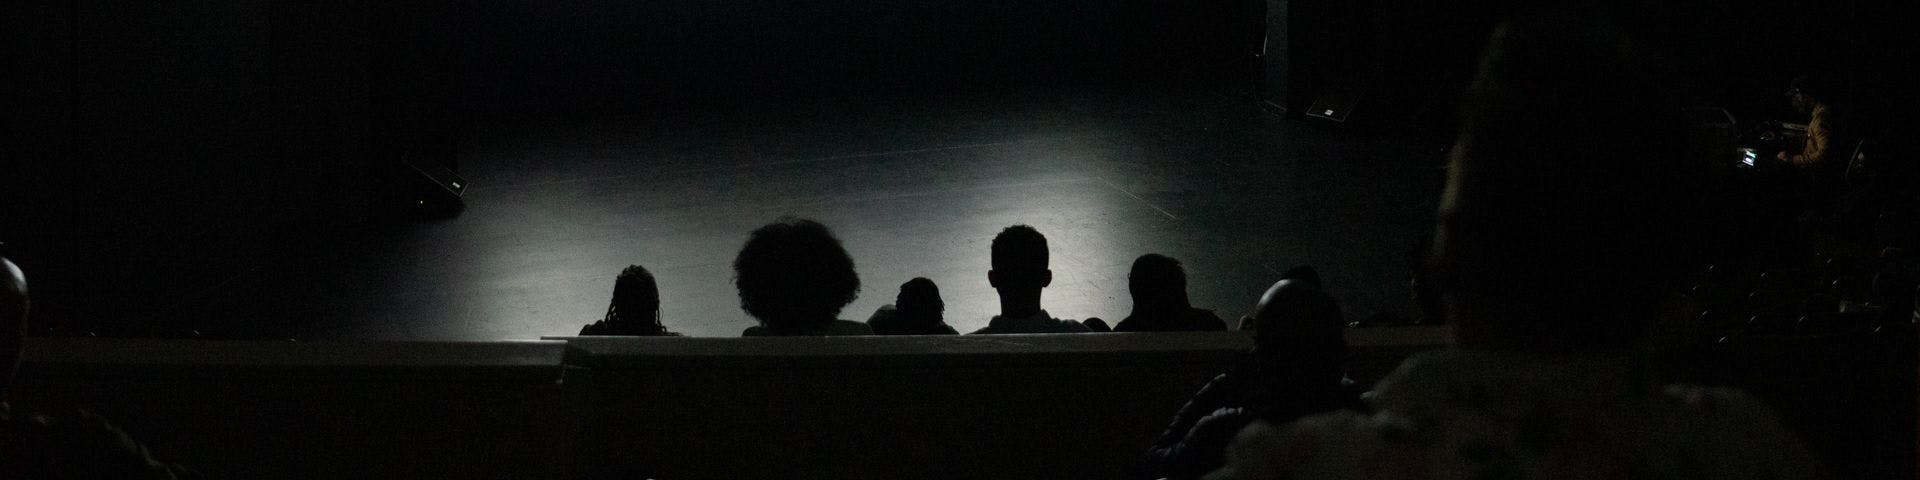 dim room with people watching a stage